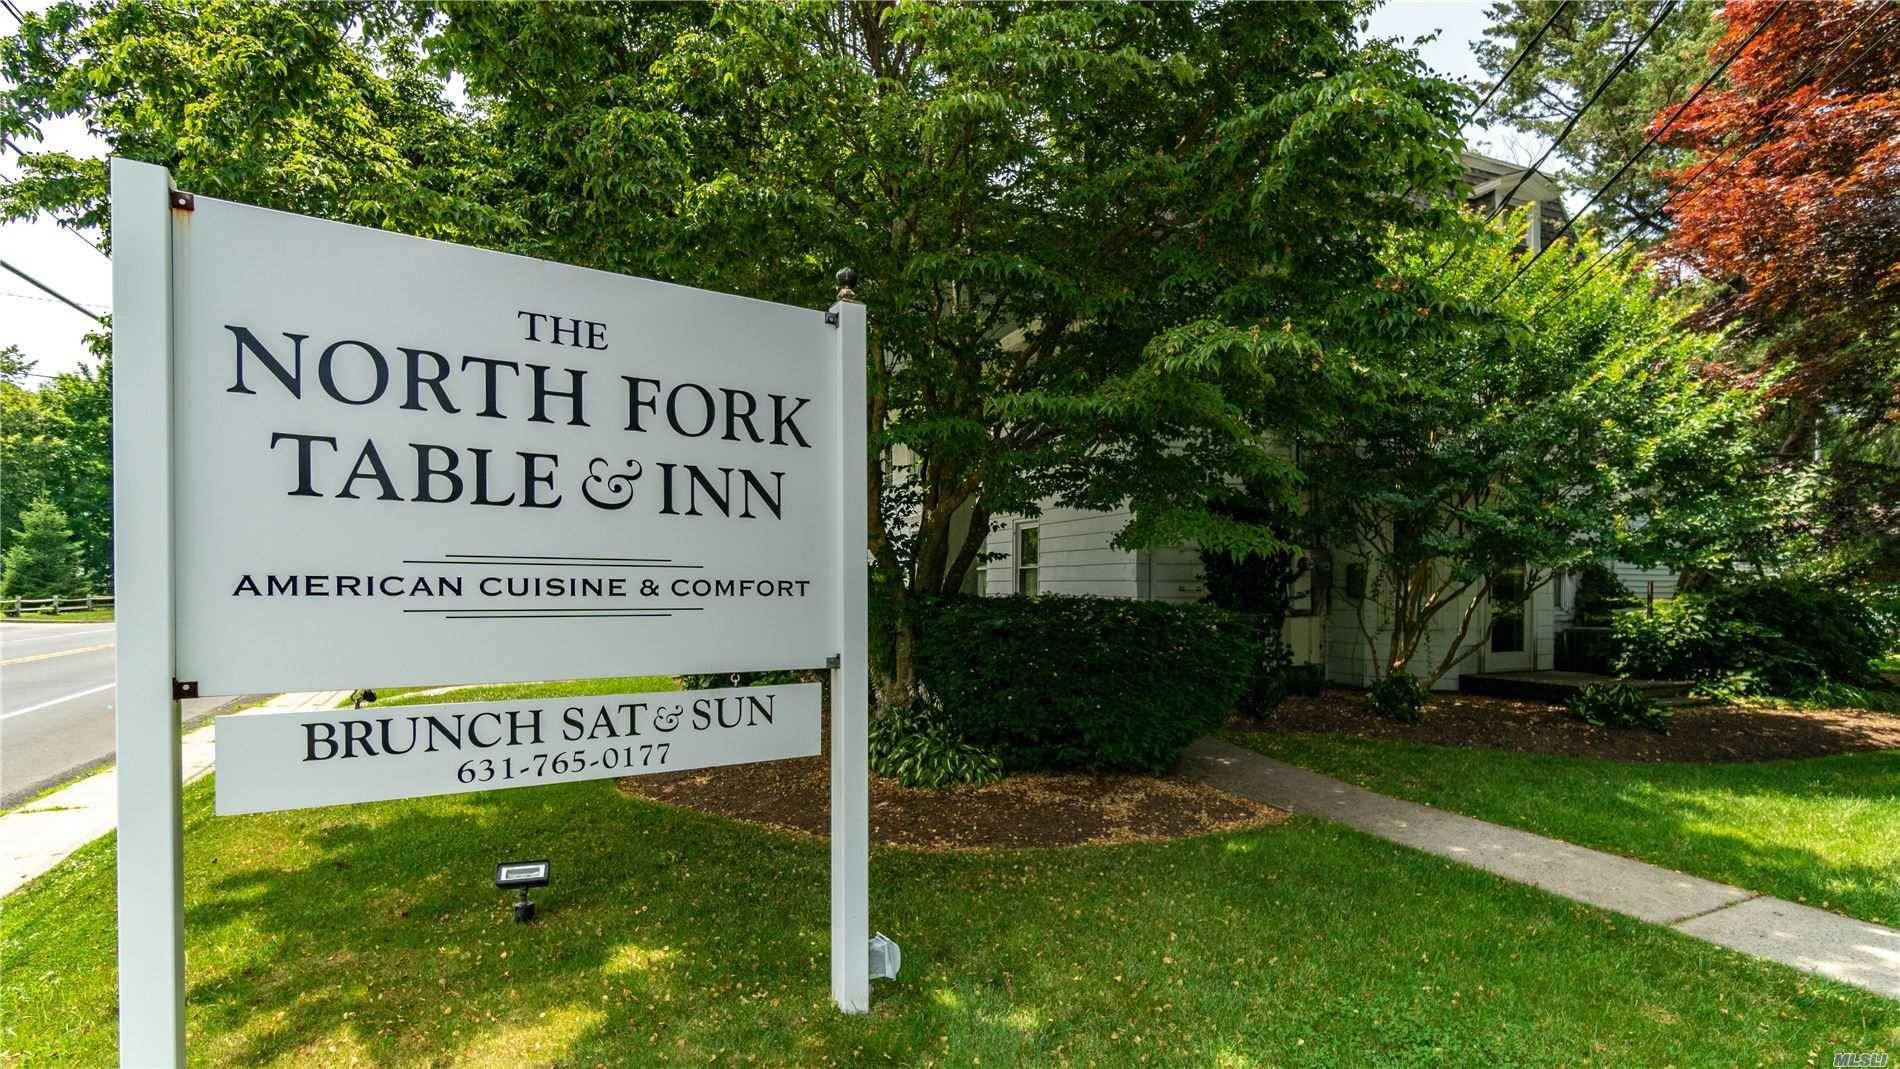 Established fine dining restaurant, catering truck, and inn for sale on the North Fork.